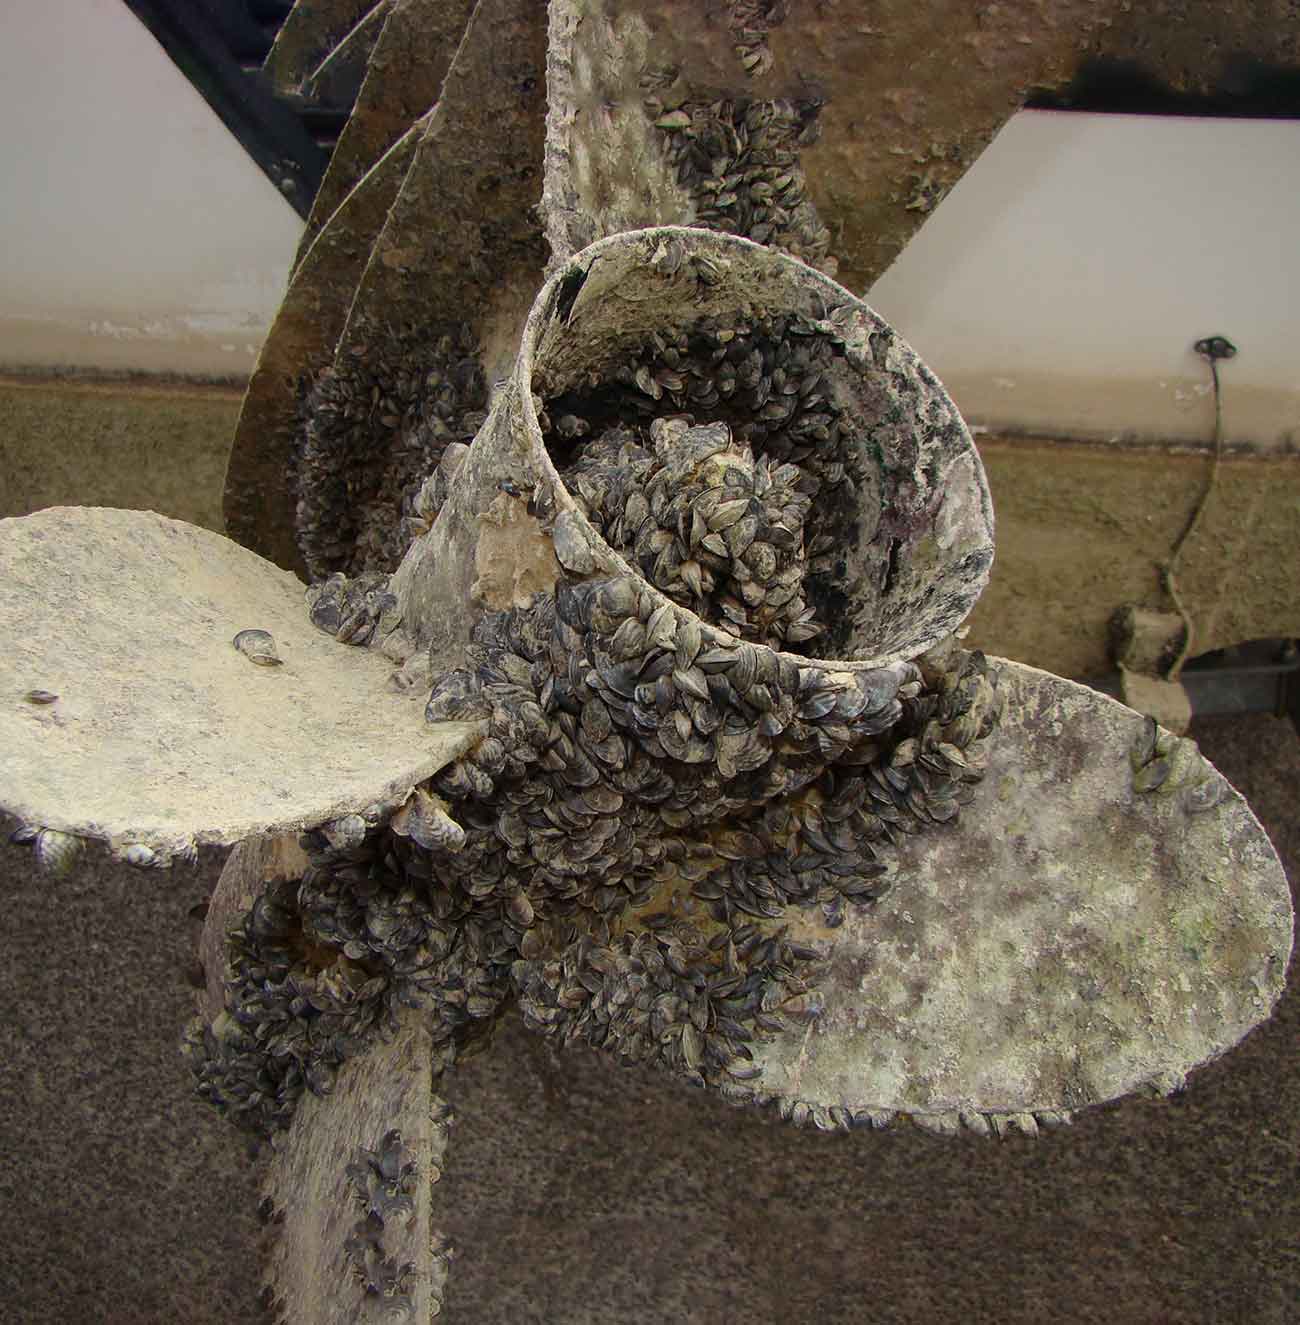 Boat motor encrusted with quagga mussels